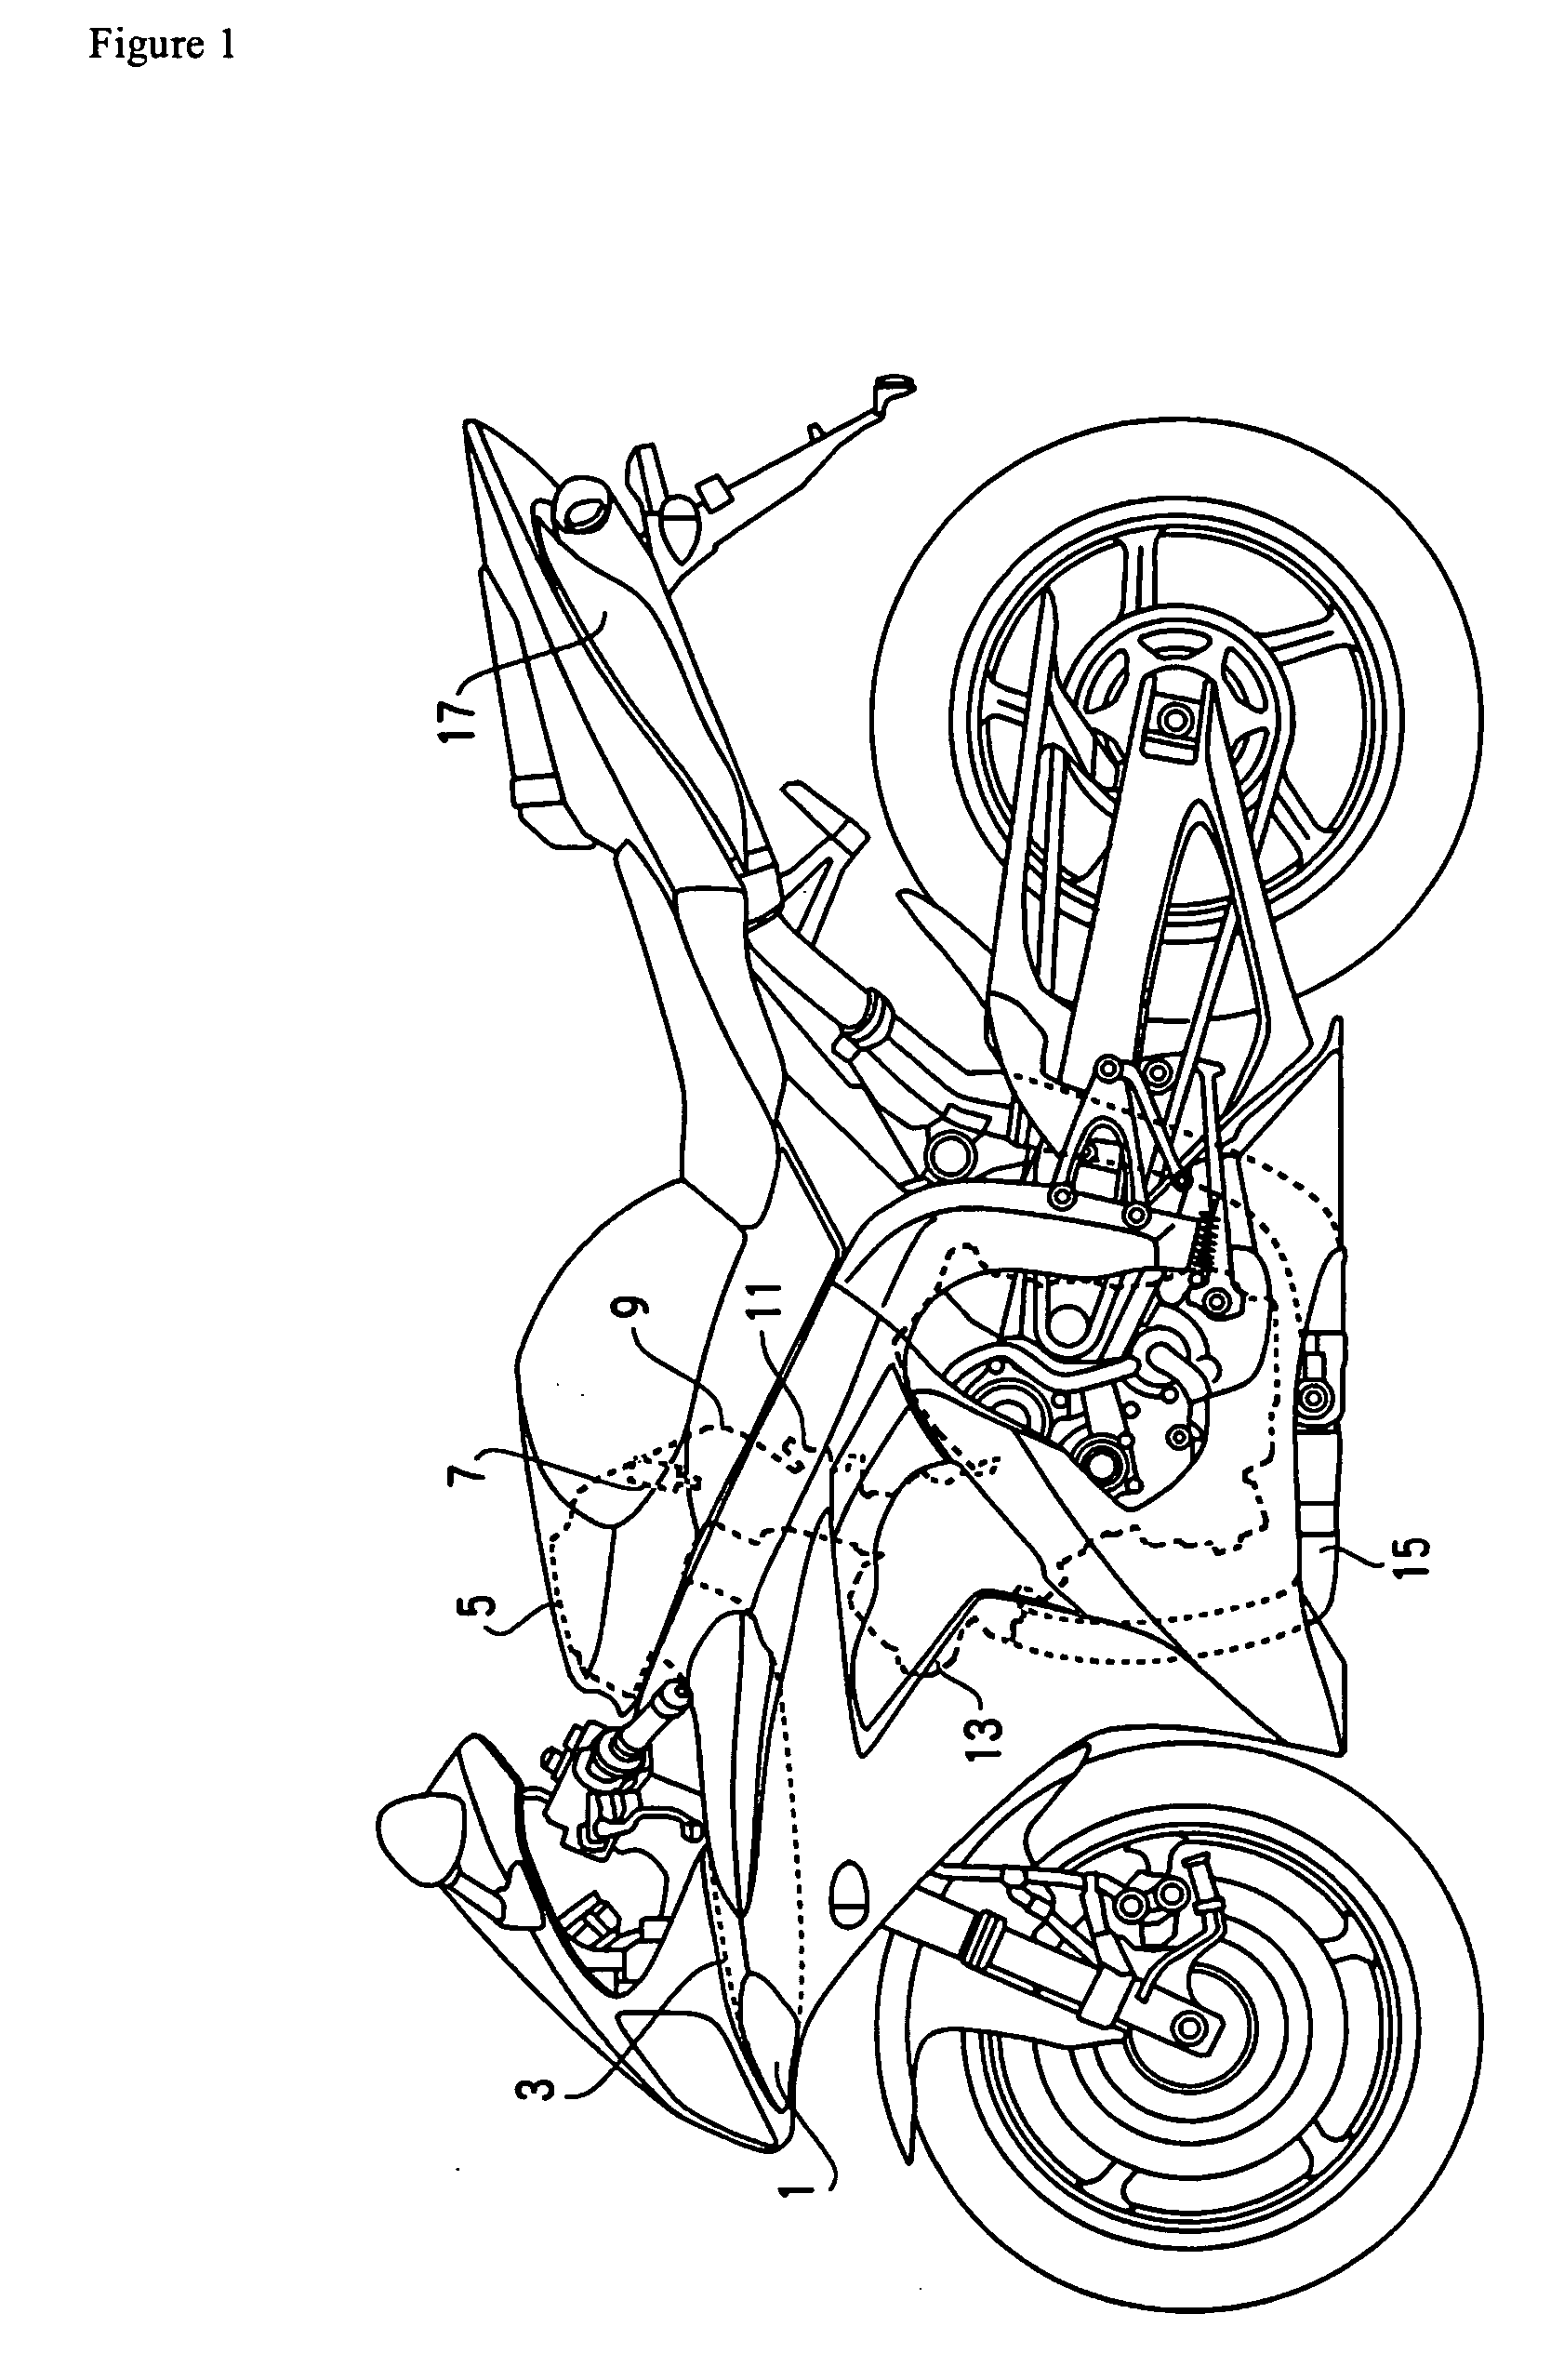 Fuel supply system and vehicle